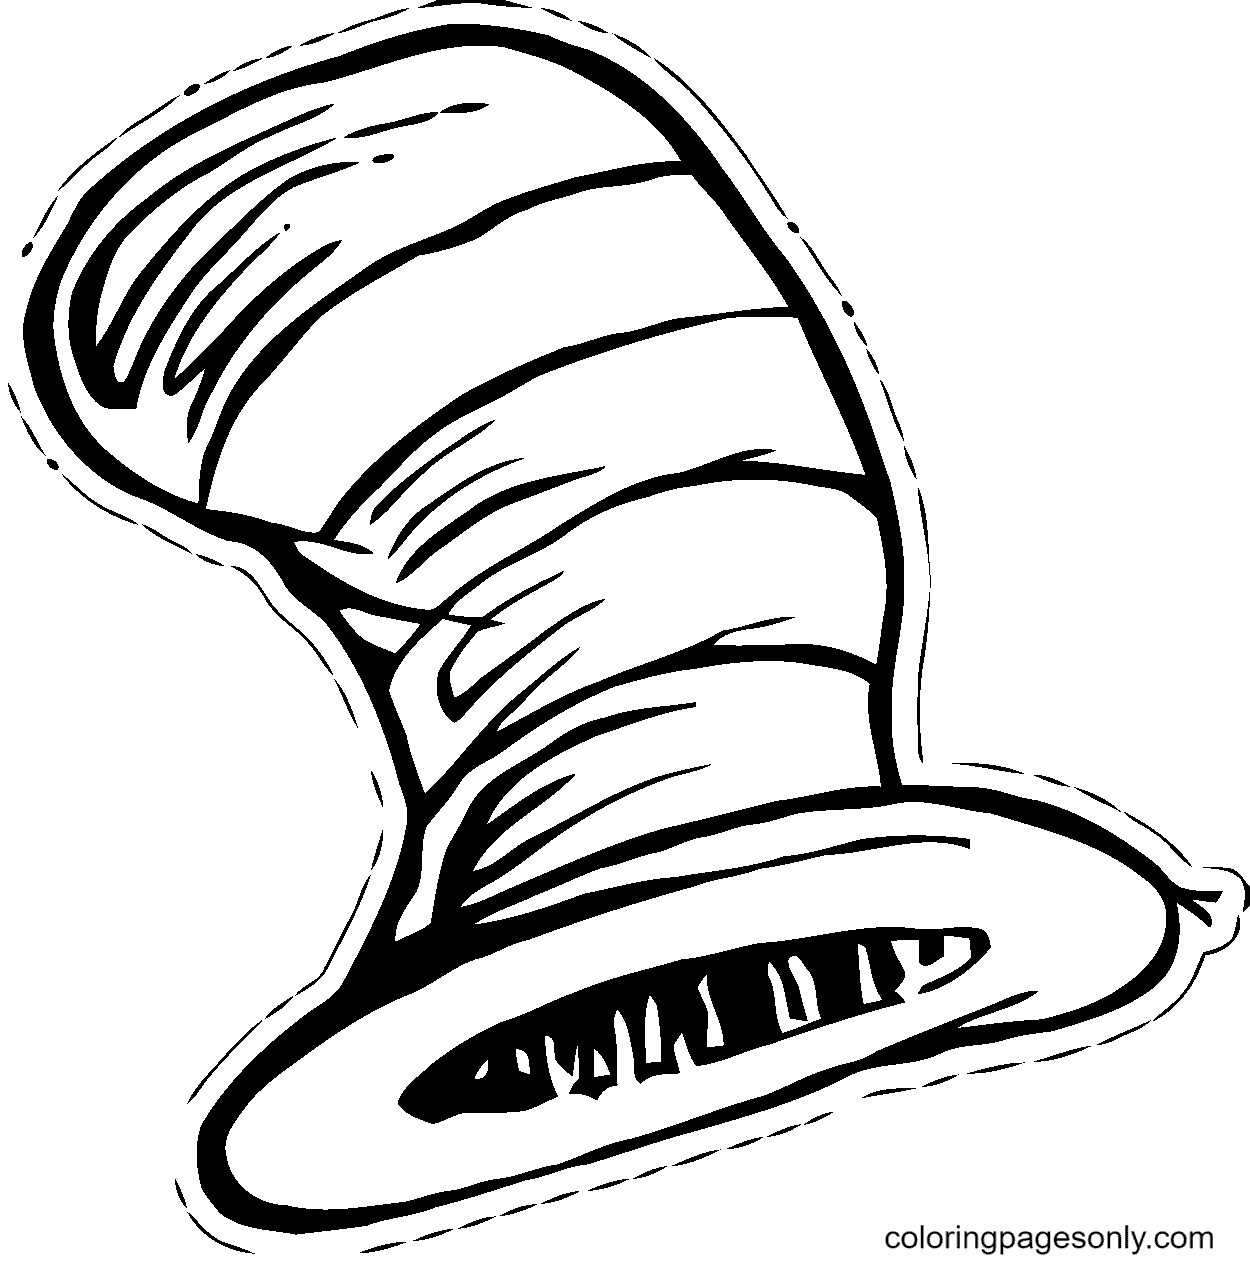 Cats hat coloring pages